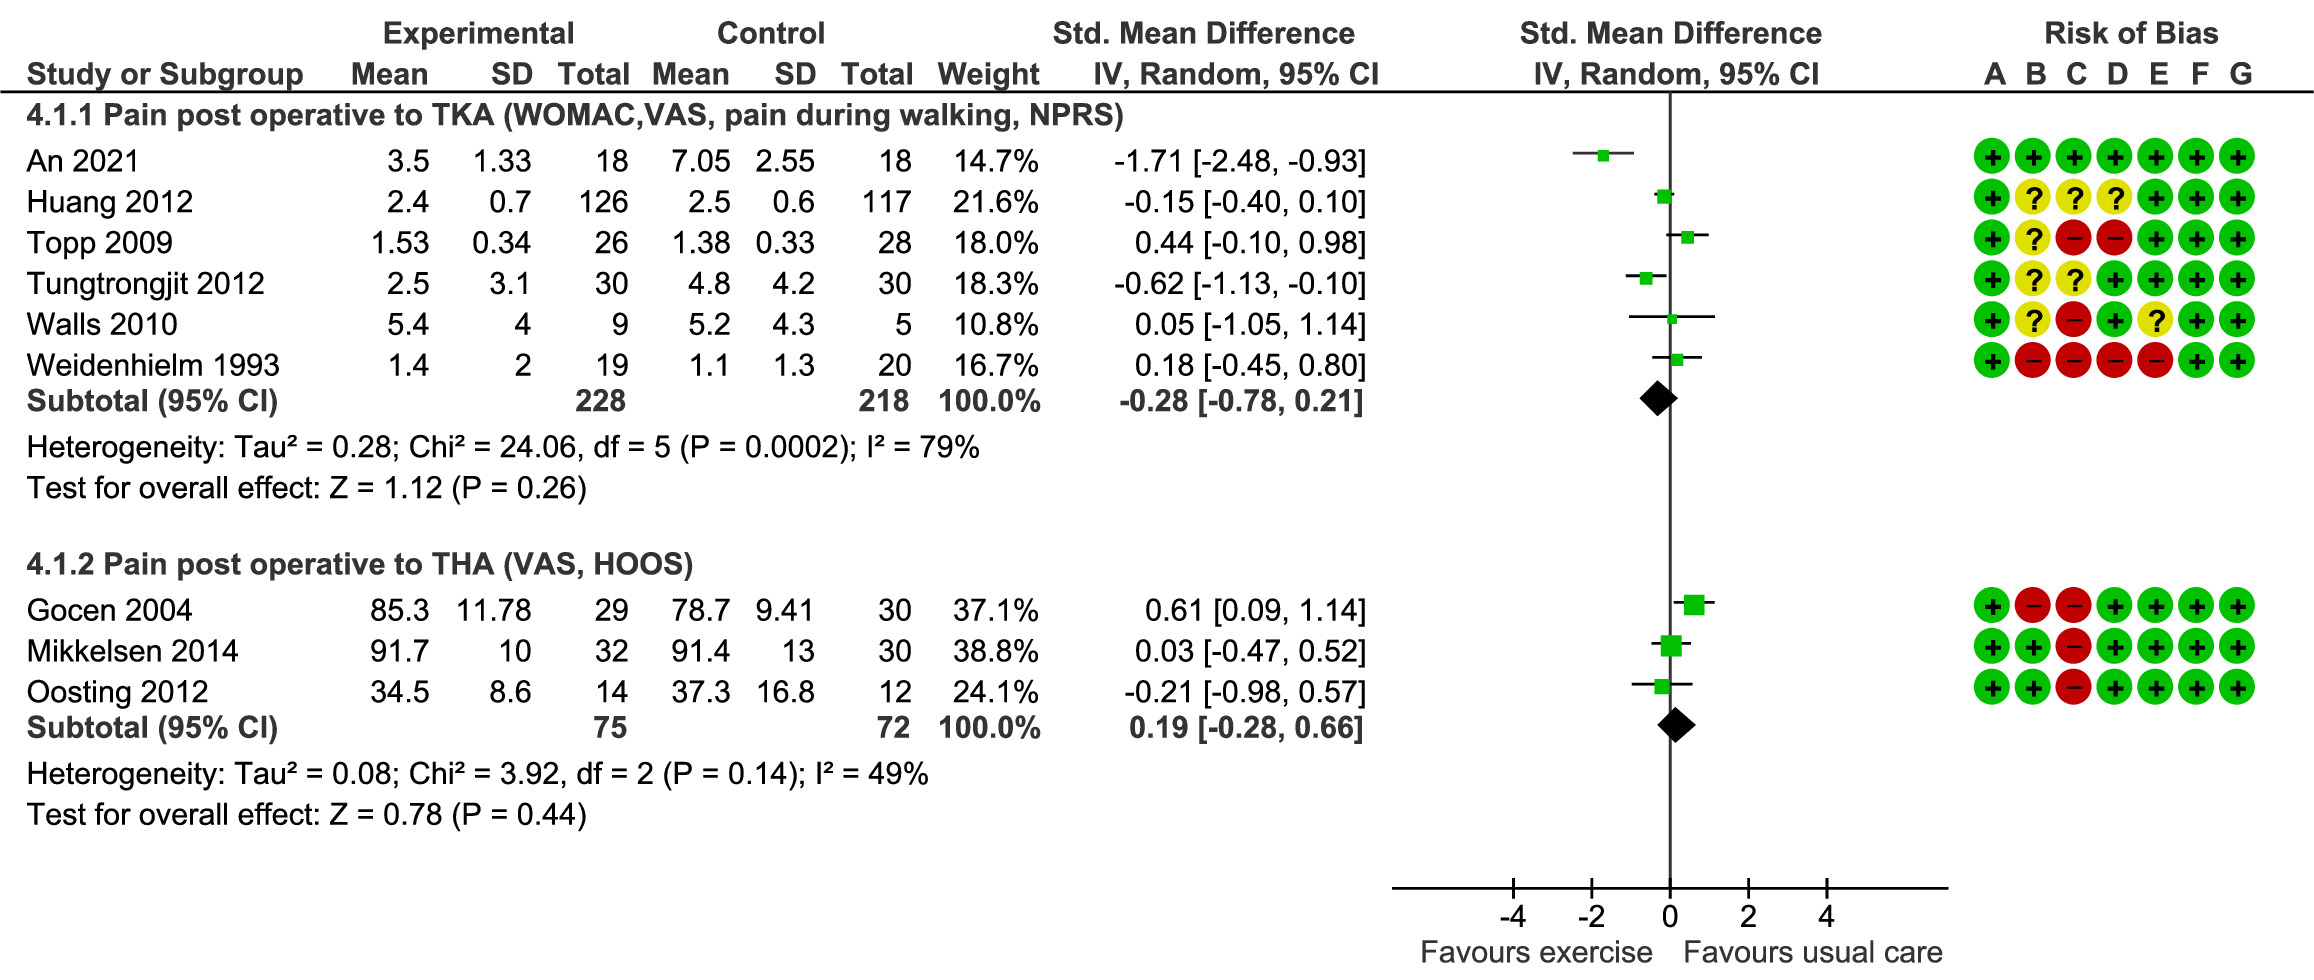 Fig. 4 
            Effect of prehabilitation versus standard care on pain post total knee arthroplasty (TKA) and total hip arthroplasty (THA). CI, confidence interval; HOOS, Hip Disability and Osteoarthritis Outcome Score; IV, inverse variance; NPRS, Numerical Pain Rating Scale; SD, standard deviation; VAS, visual analogue scale; WOMAC, Western Ontario and McMaster Universities Osteoarthritis Index.
          